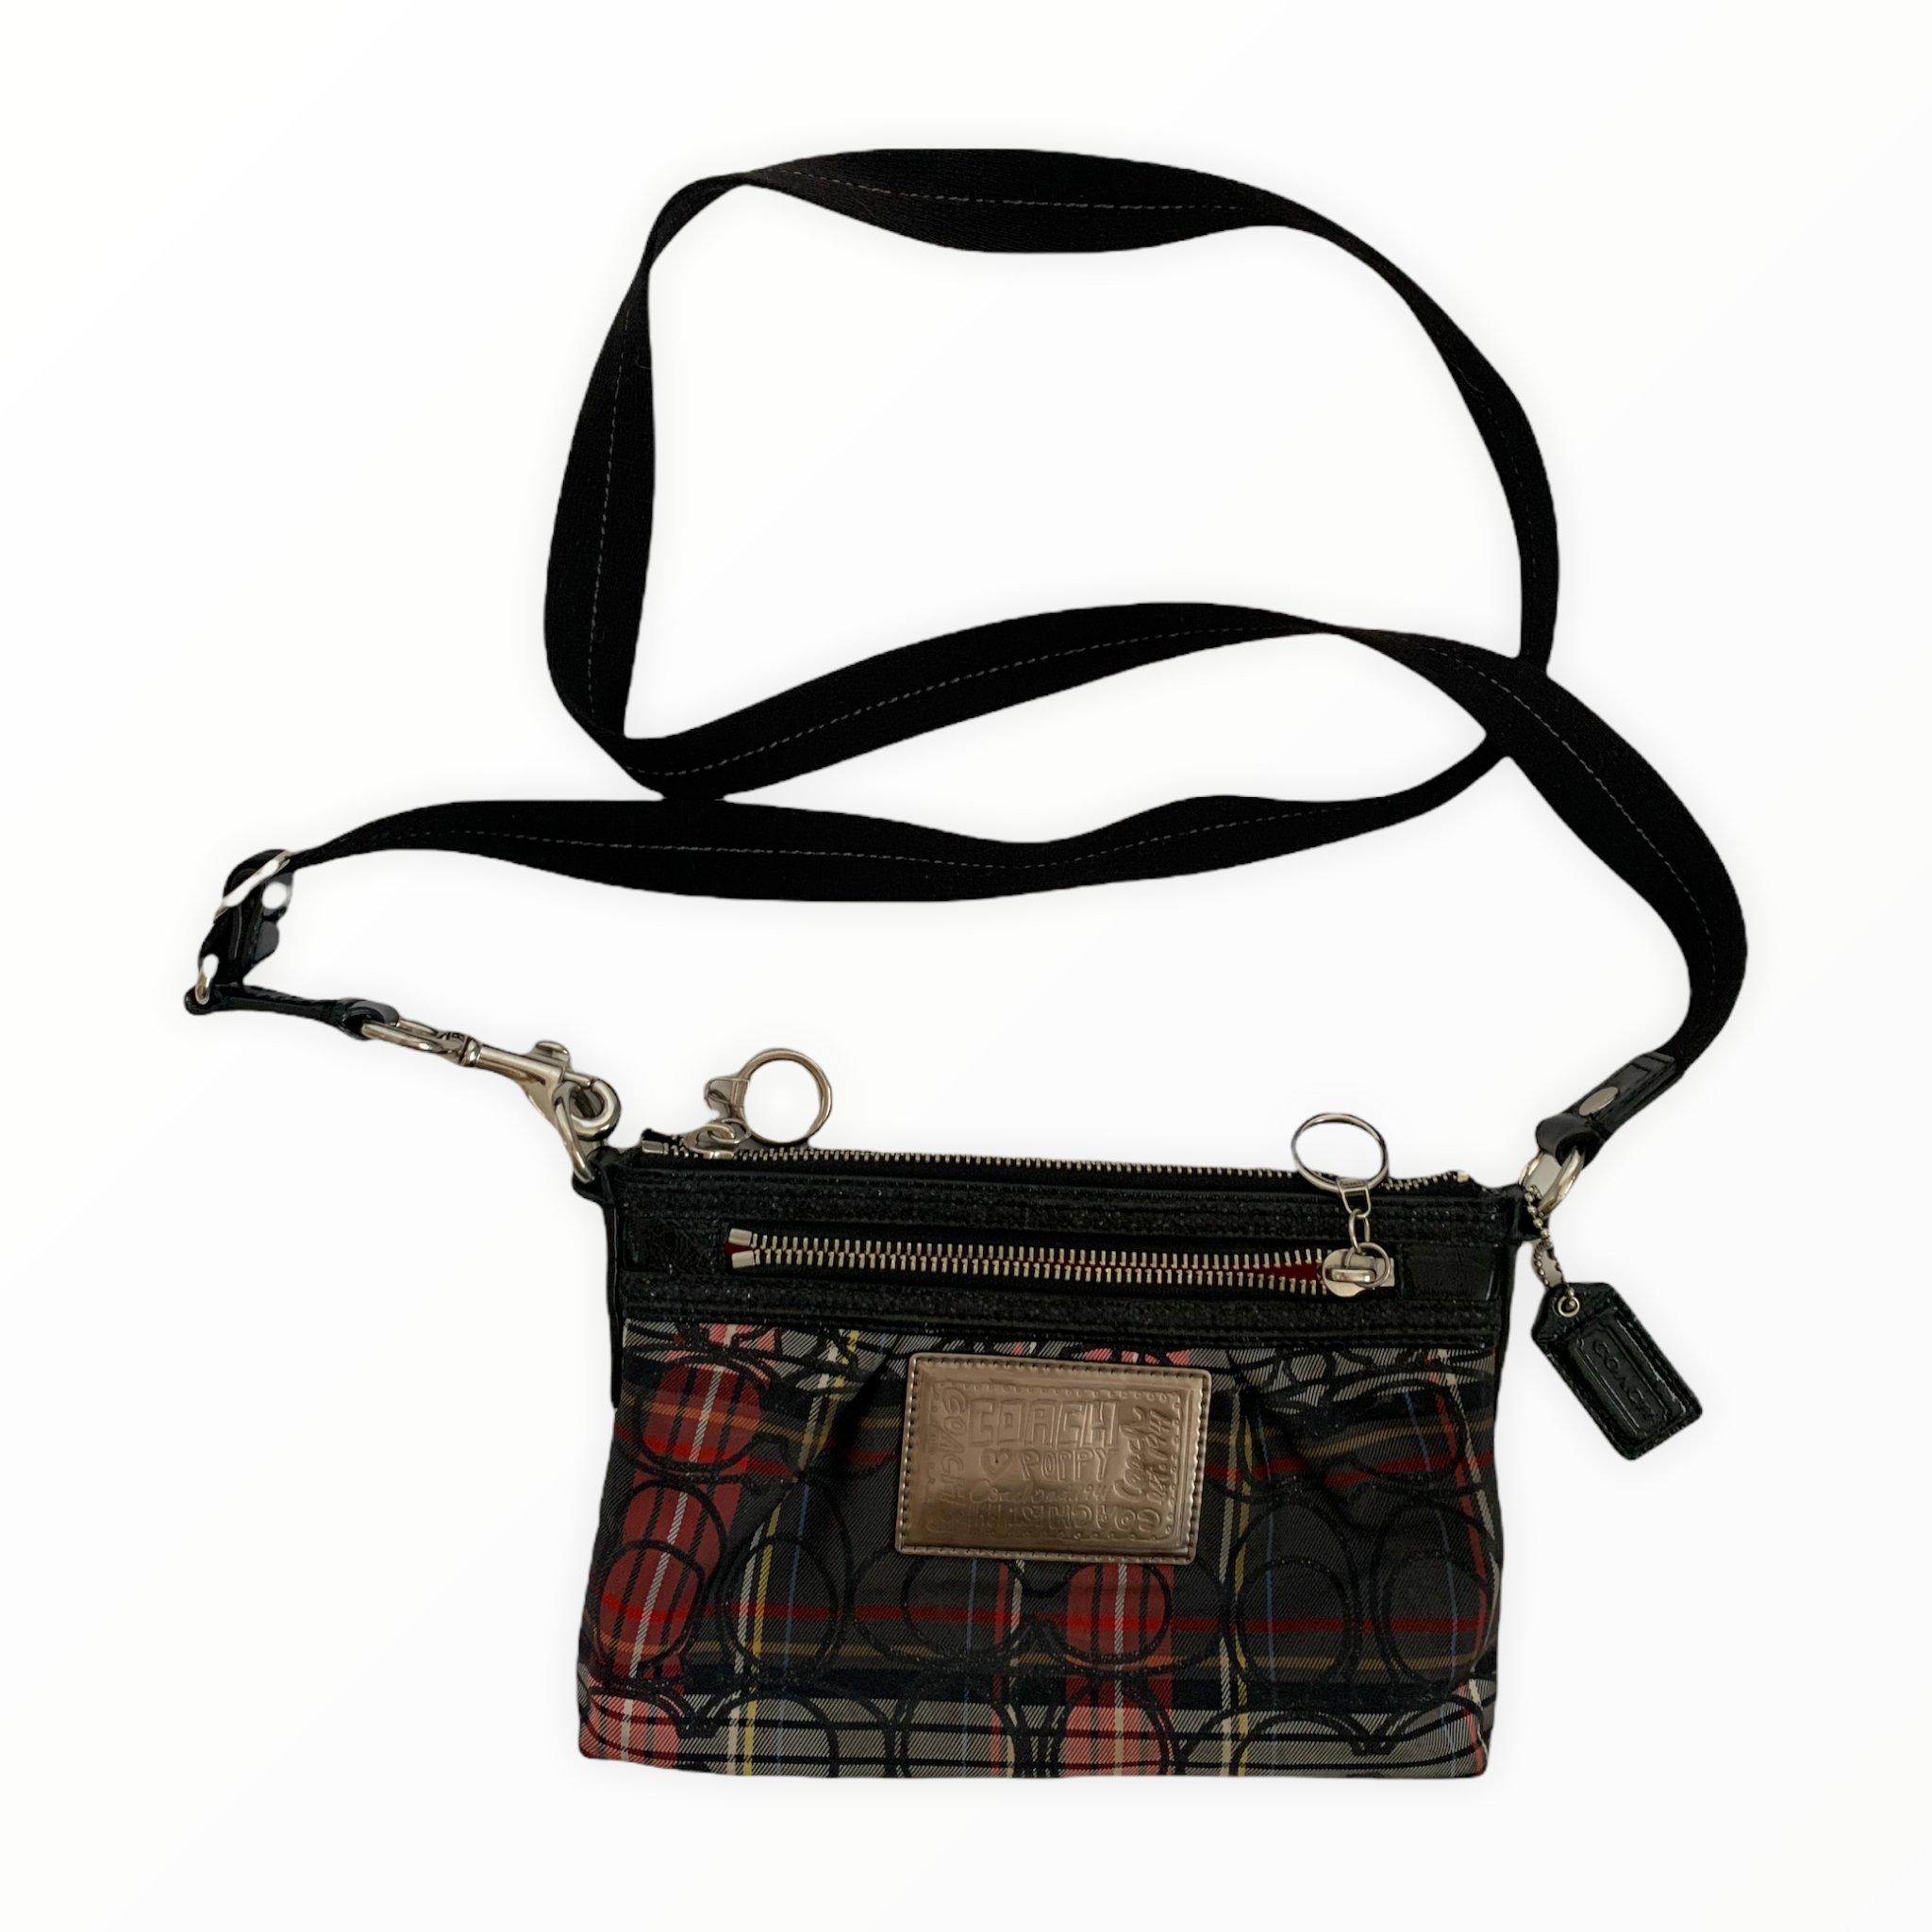 Patricia Nash Designs - Our cheerful red Tartan Plaid is back for the  holidays! In a variety of styles with gold foil accents and distressed  black patent trim, we hope our festive